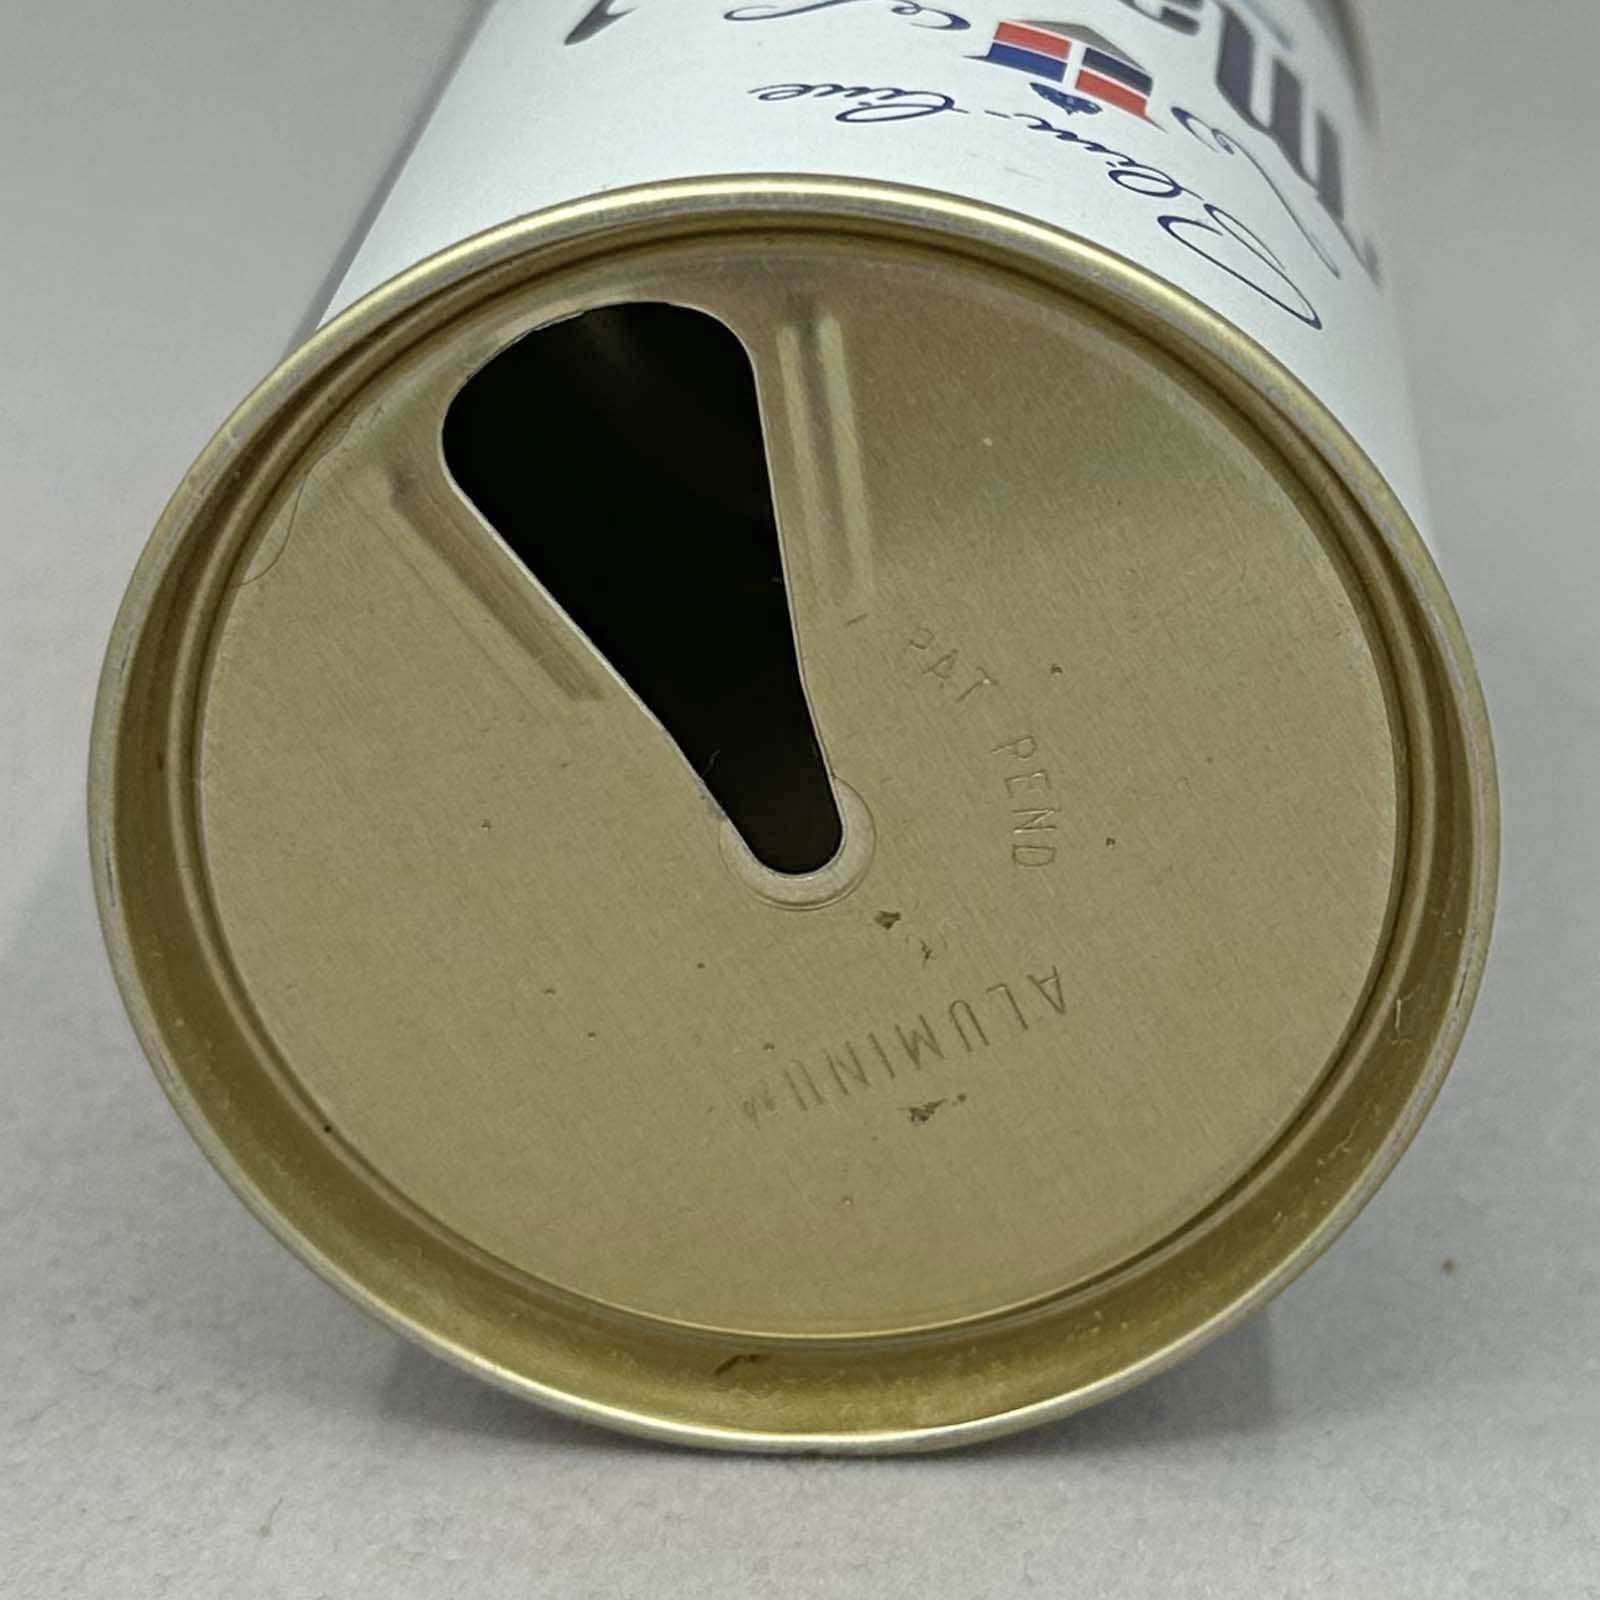 mark v 91-23 pull tab beer can 5